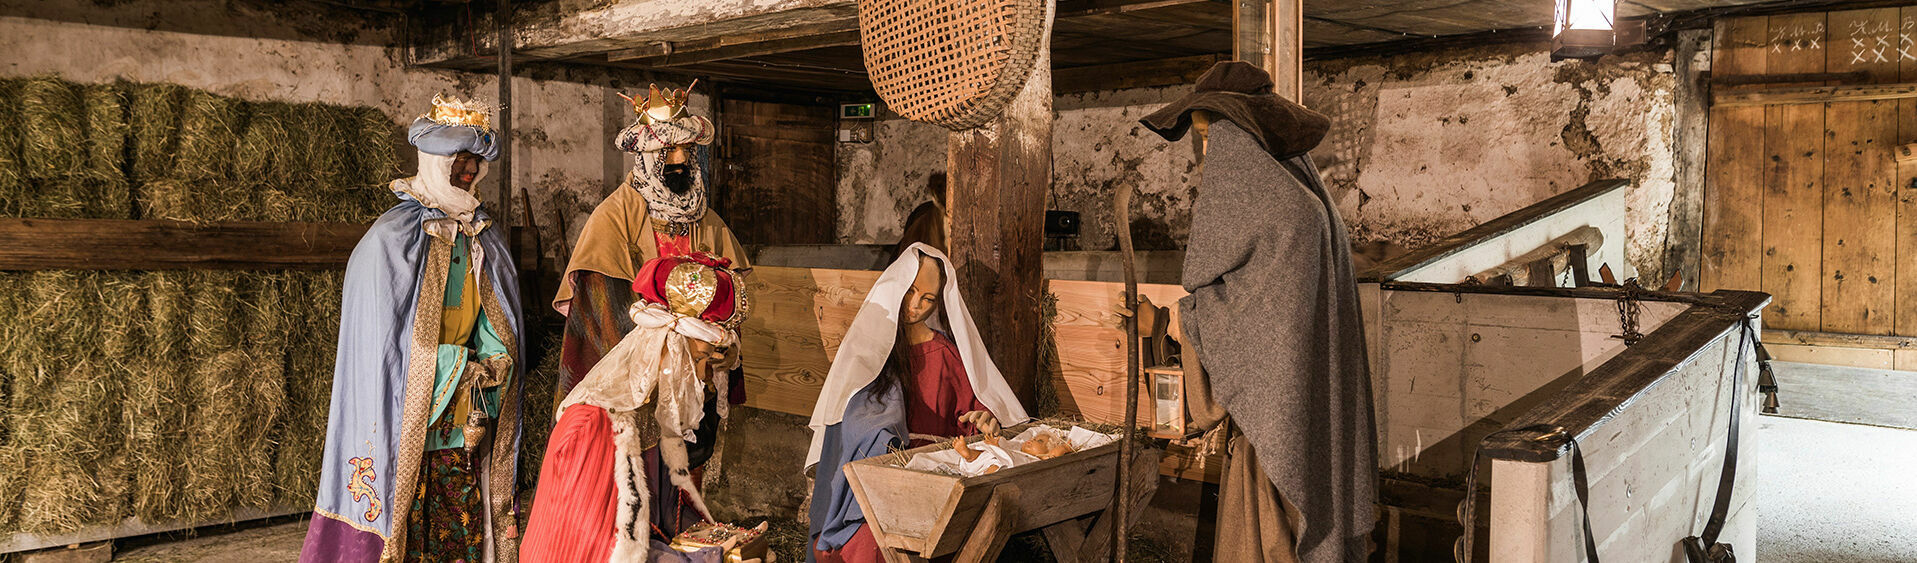 Each year, the local history museum Achental - Sixenhof plays host to the Tirolean Mountain Christmas with a live-size nativity scene and live animals.